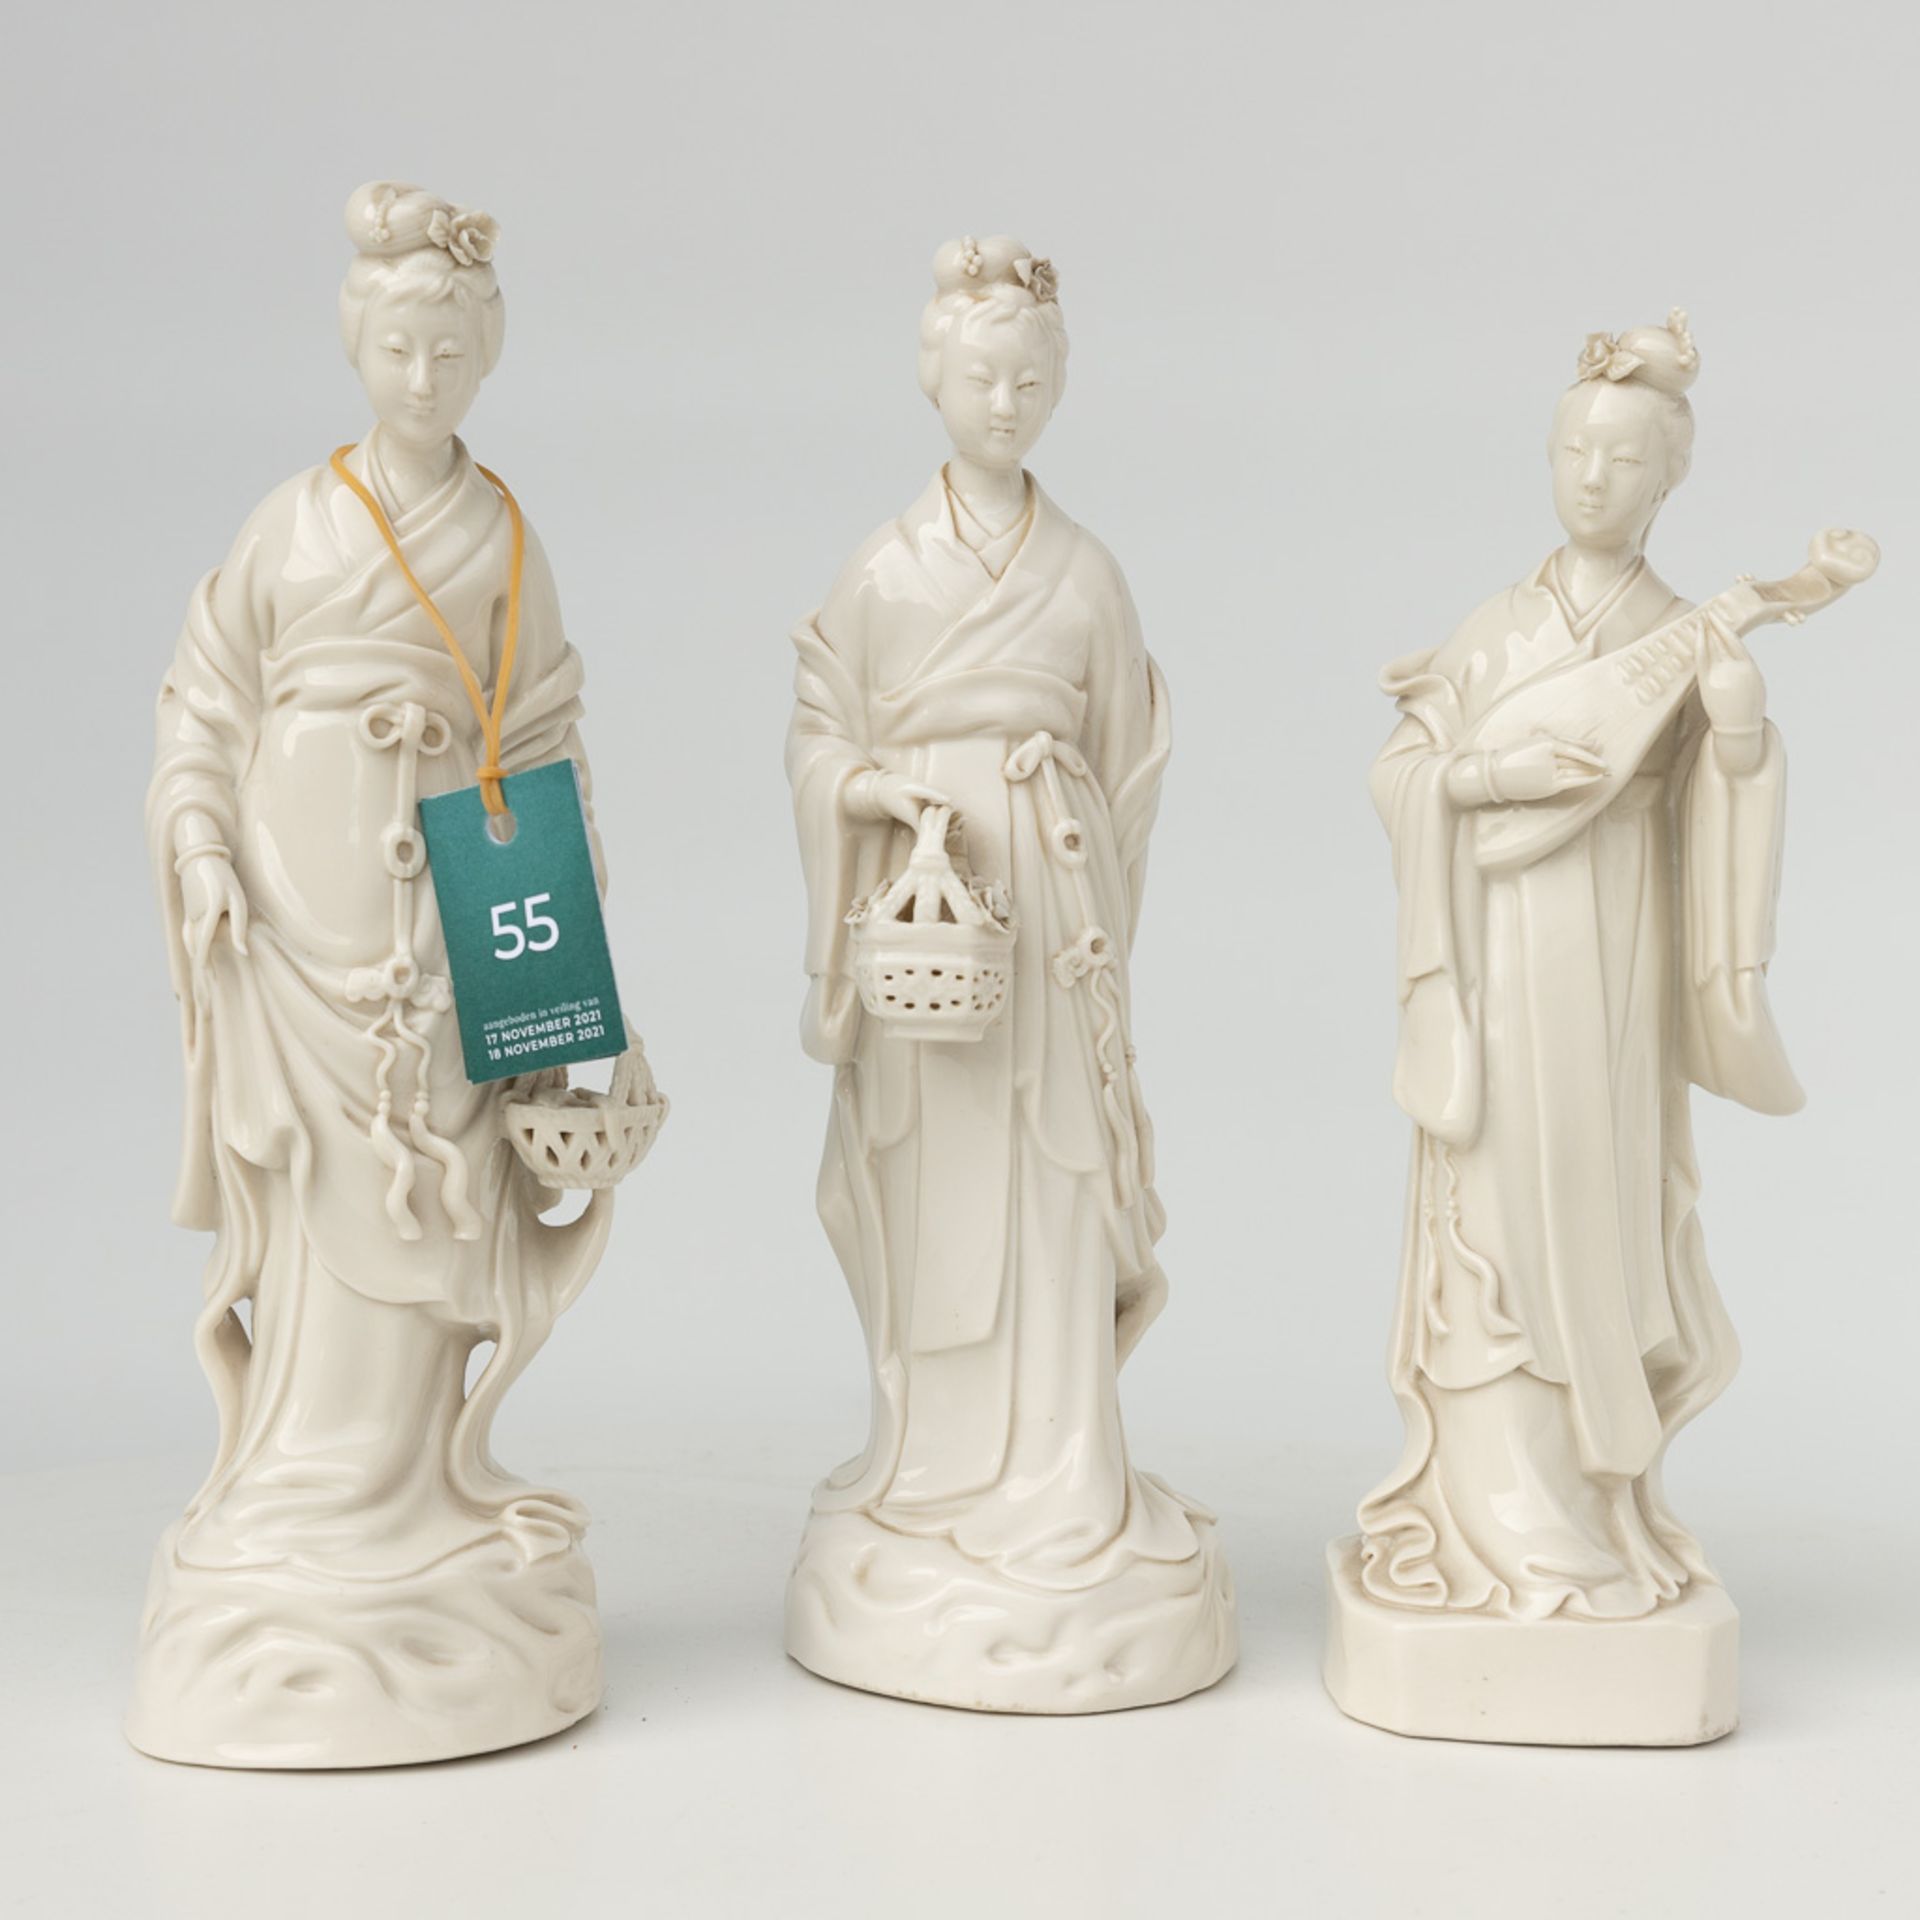 A collection of 3 female figurative statues 'Blanc De Chine' made of Chinese porcelain. - Image 15 of 16